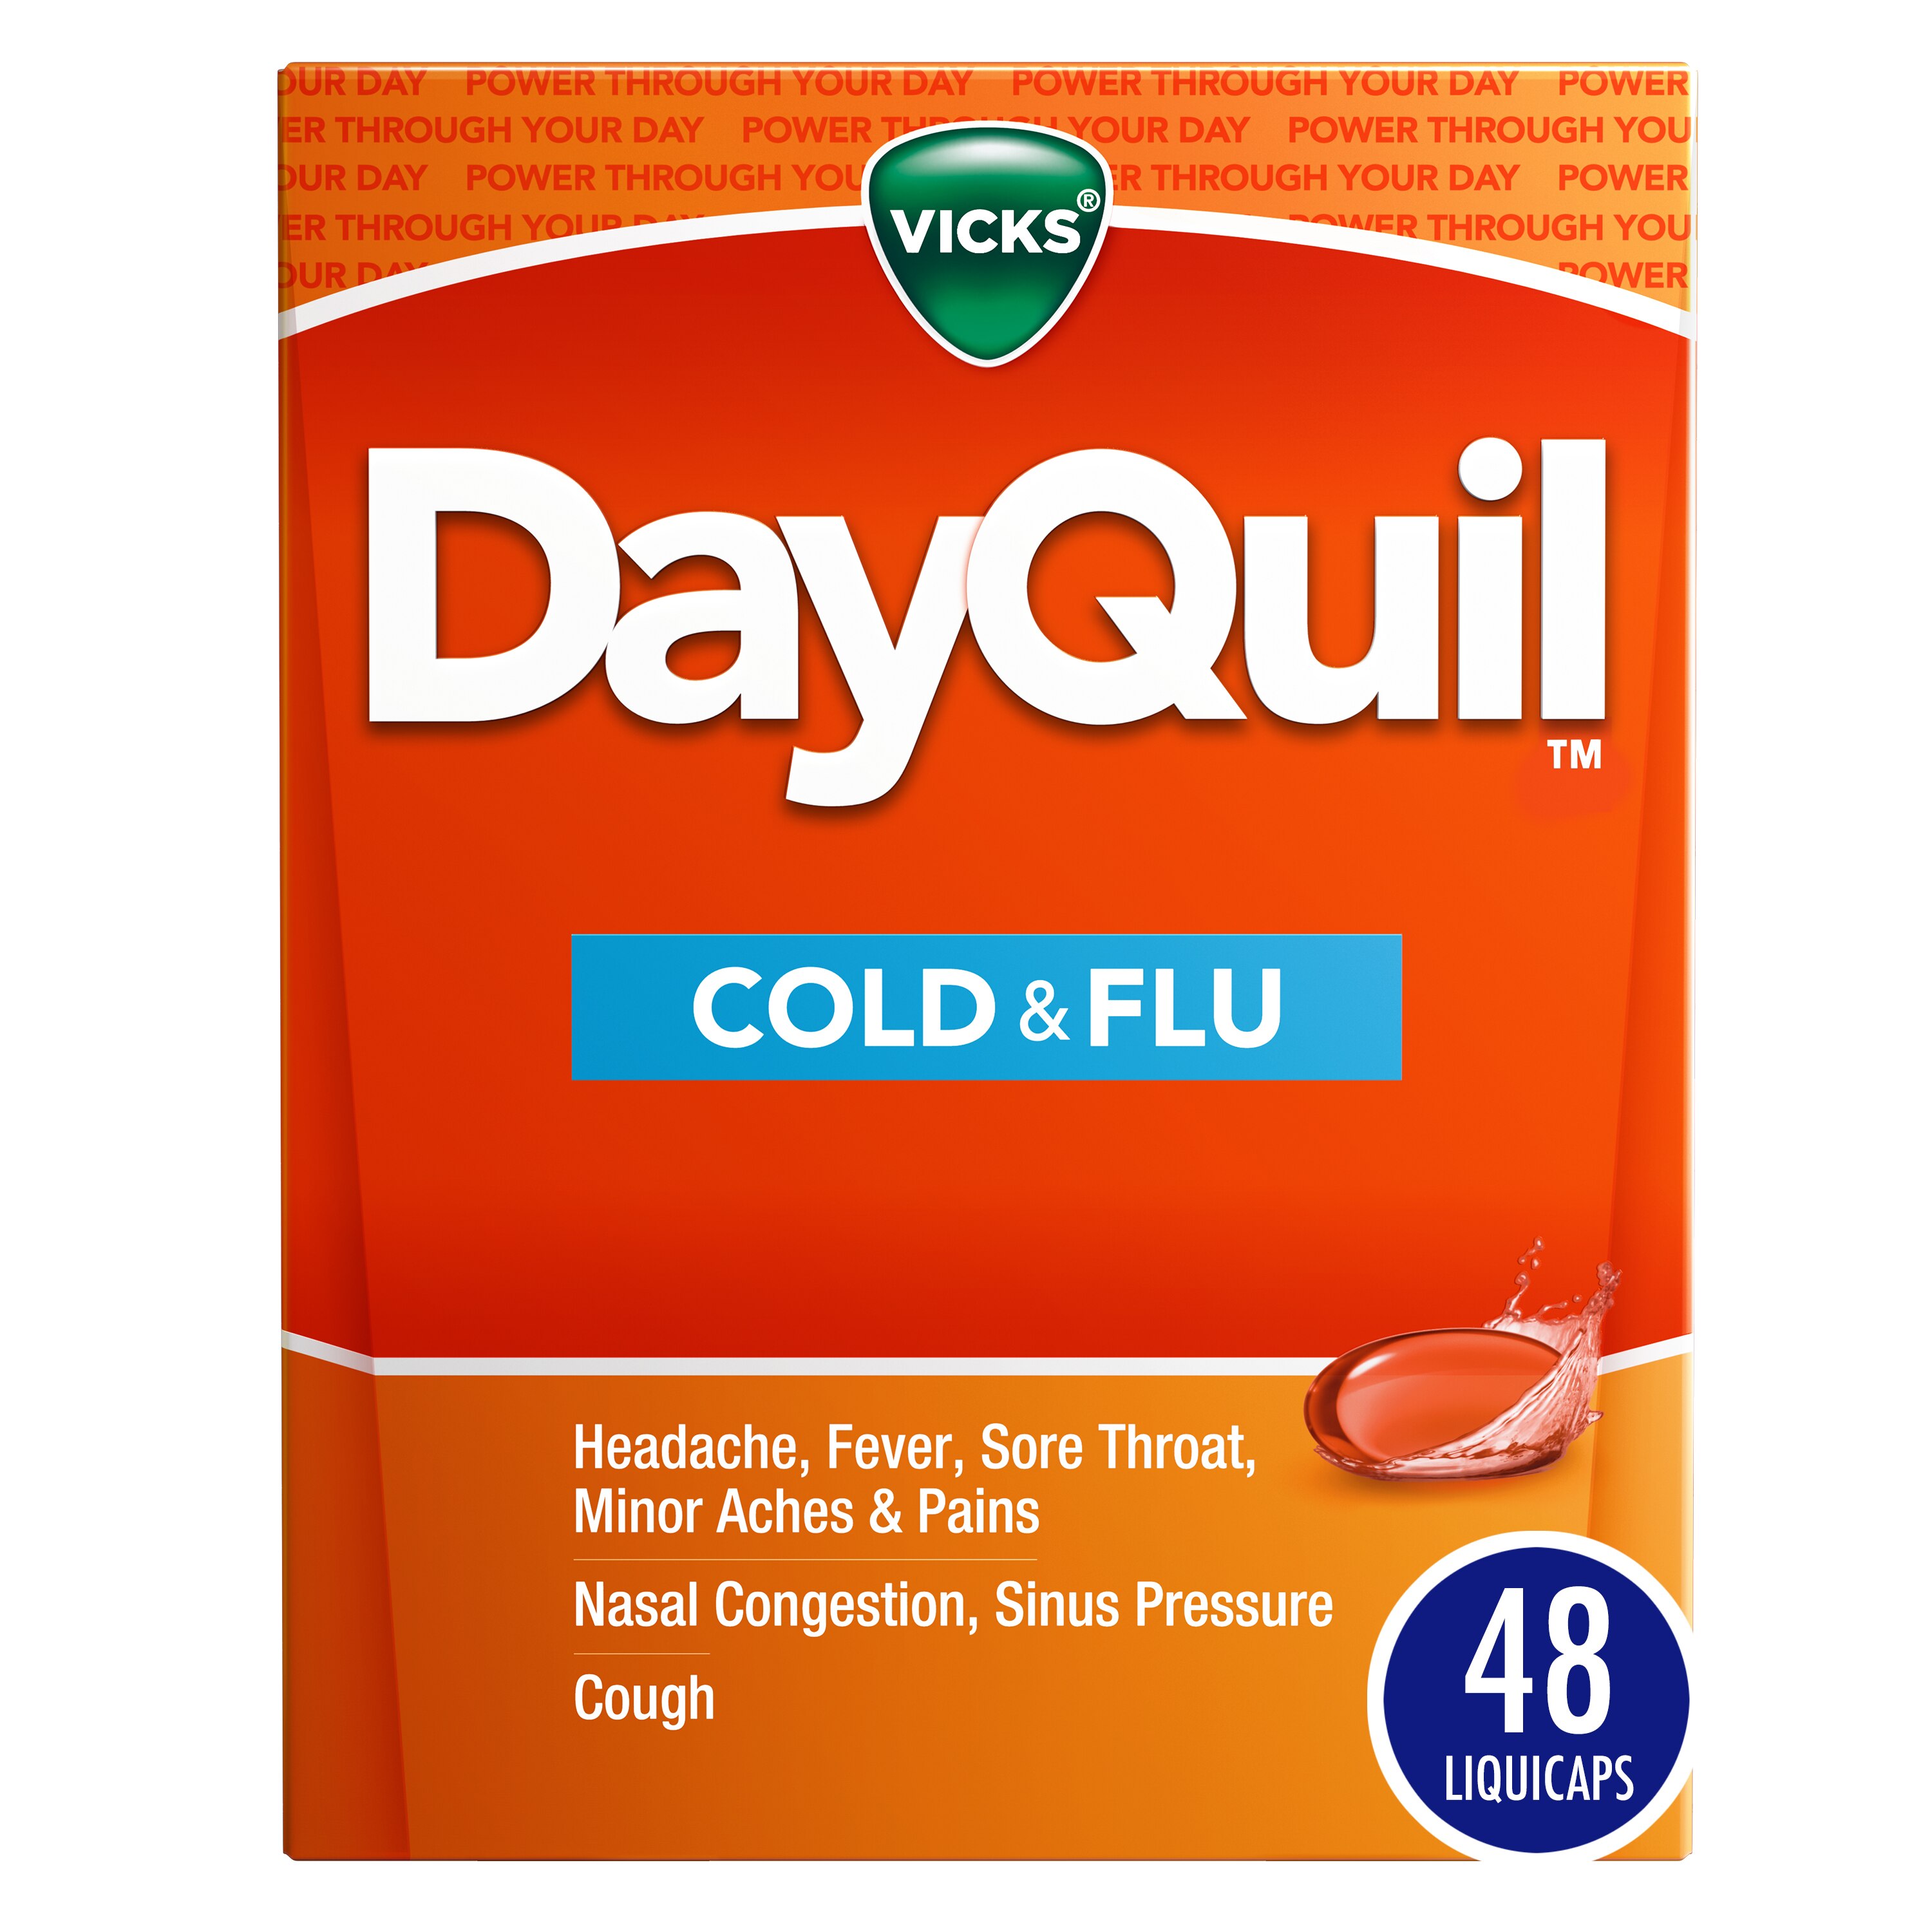 Vicks NyQuil Severe Cold & Flu Nighttime Relief Flavor Liquid